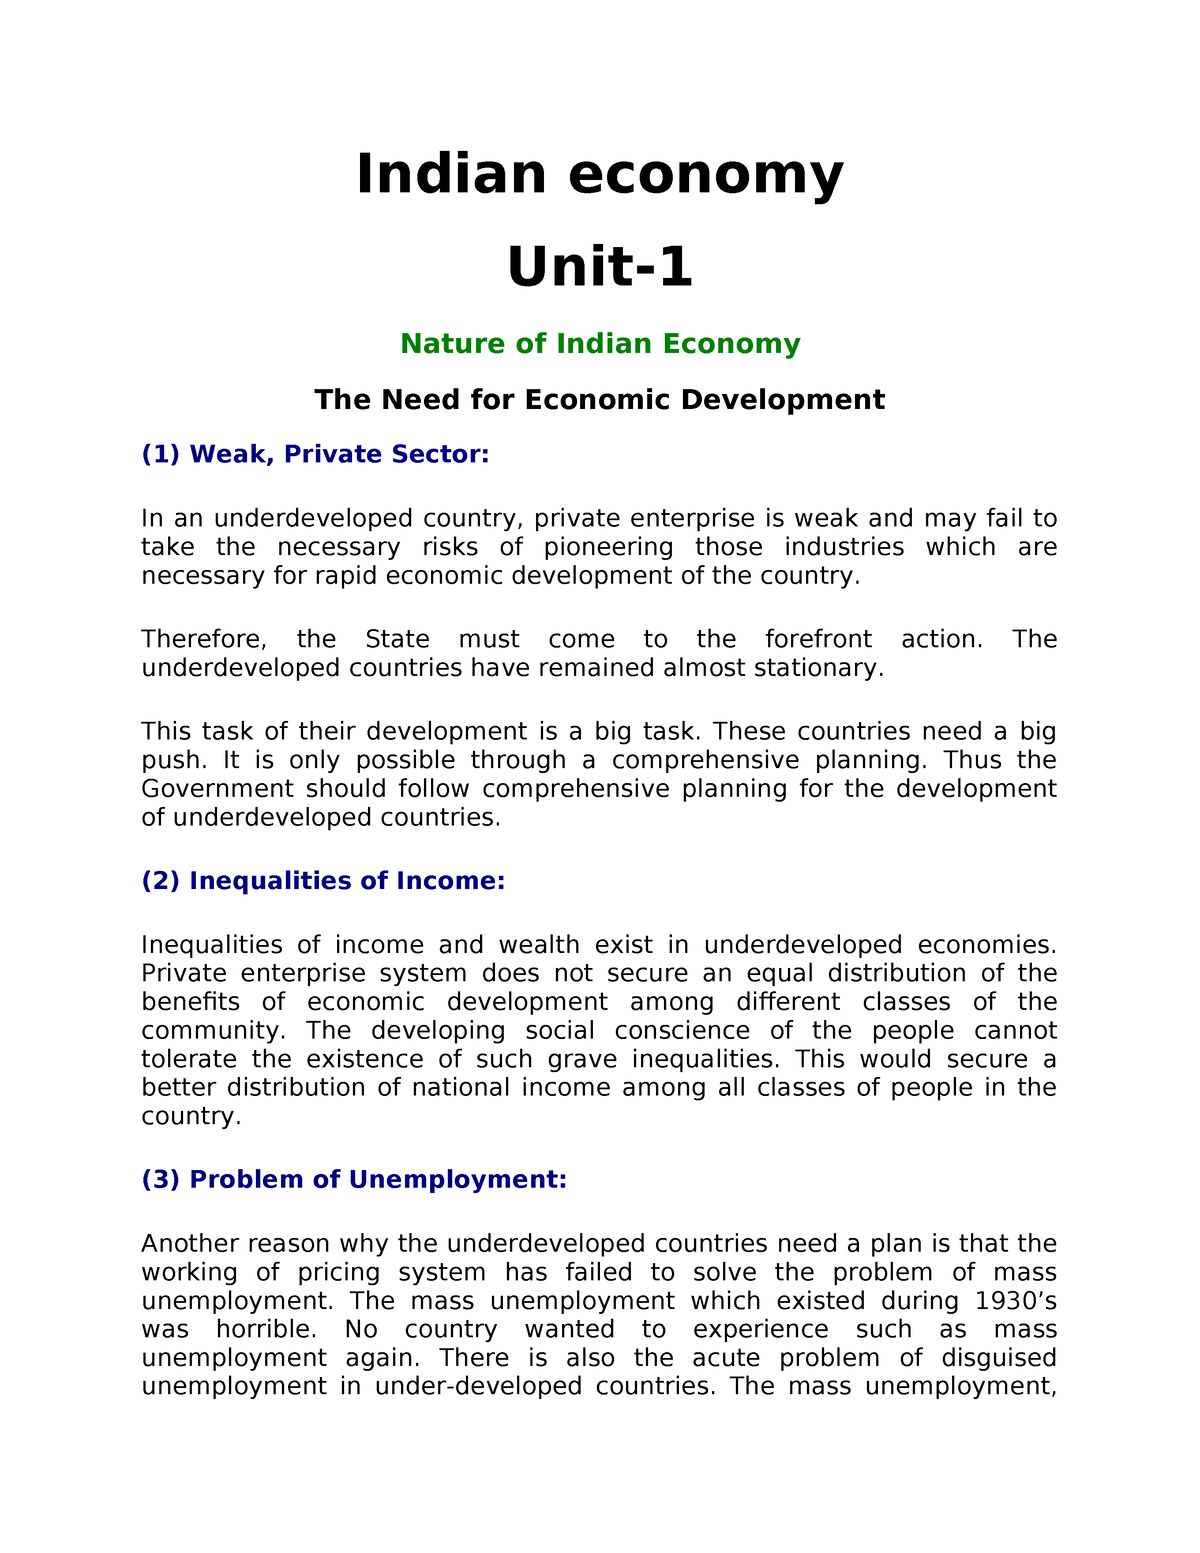 research paper for indian economy